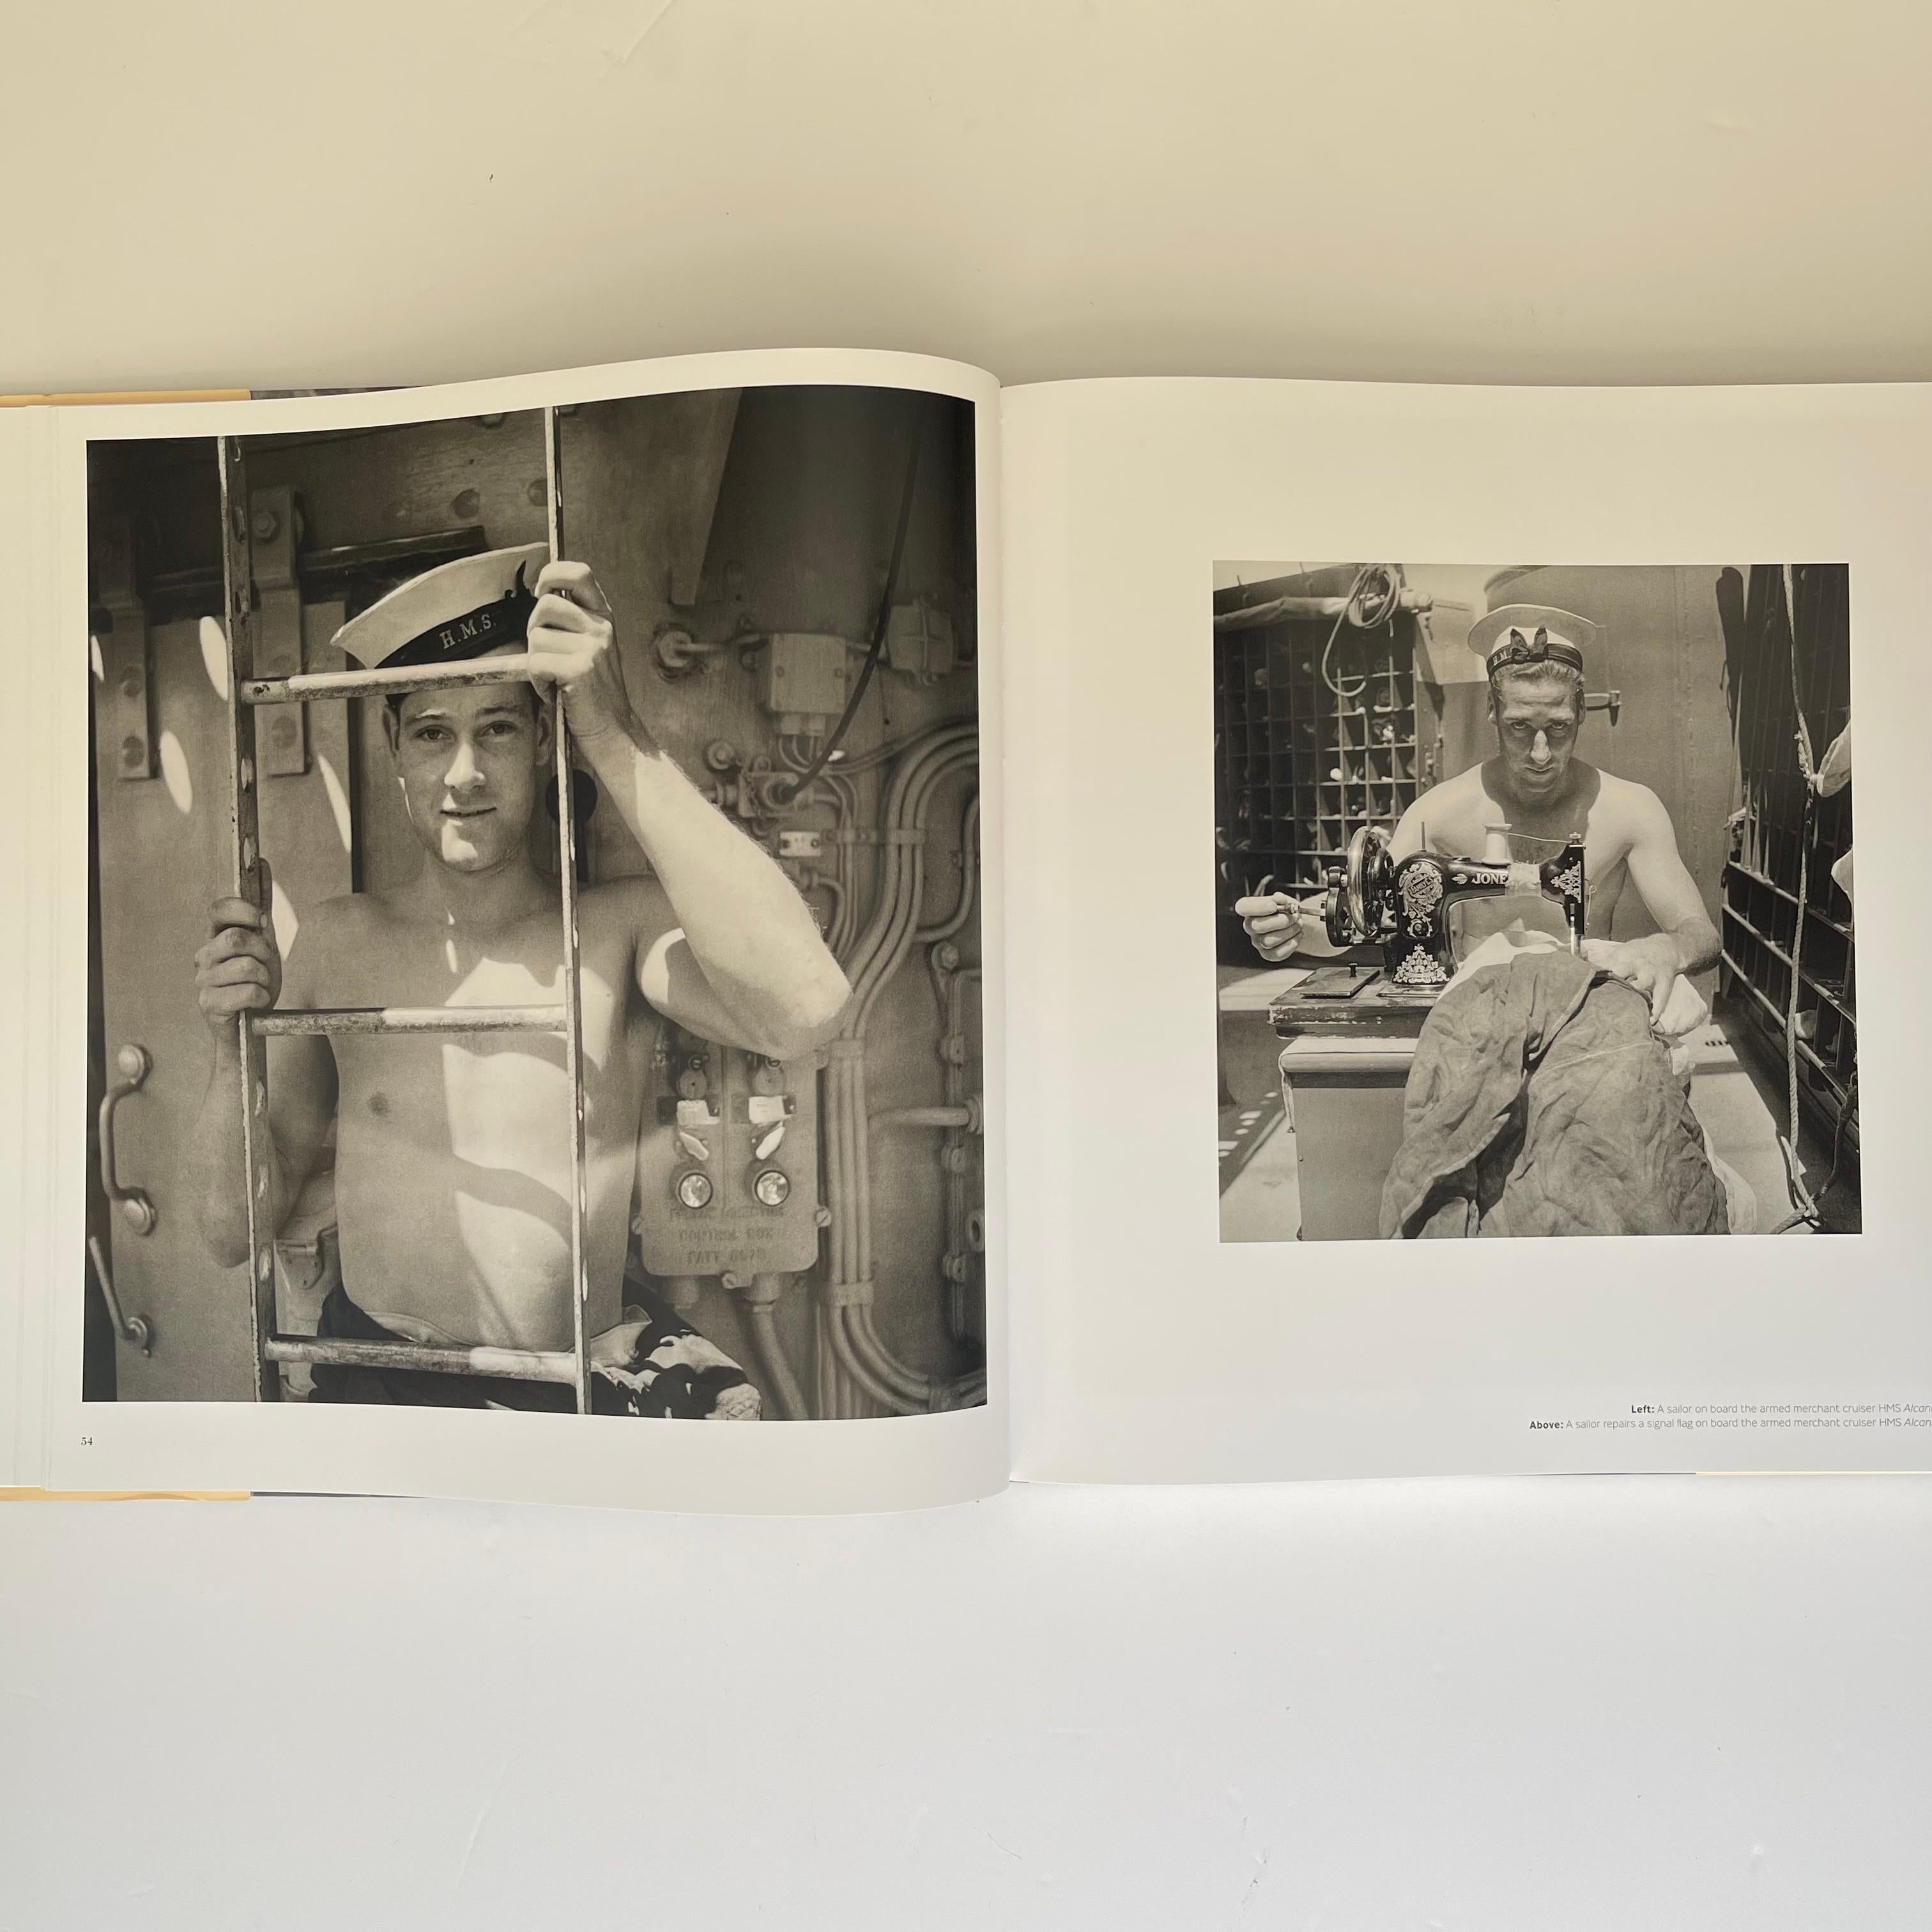 Published by Jonathan Cape its Edition 2012 English text

At the beginning of the Second World War the Ministry of Information, through the advice of Kenneth Clark, commissioned Cecil Beaton to photograph the Home Front. Beaton set to work recording